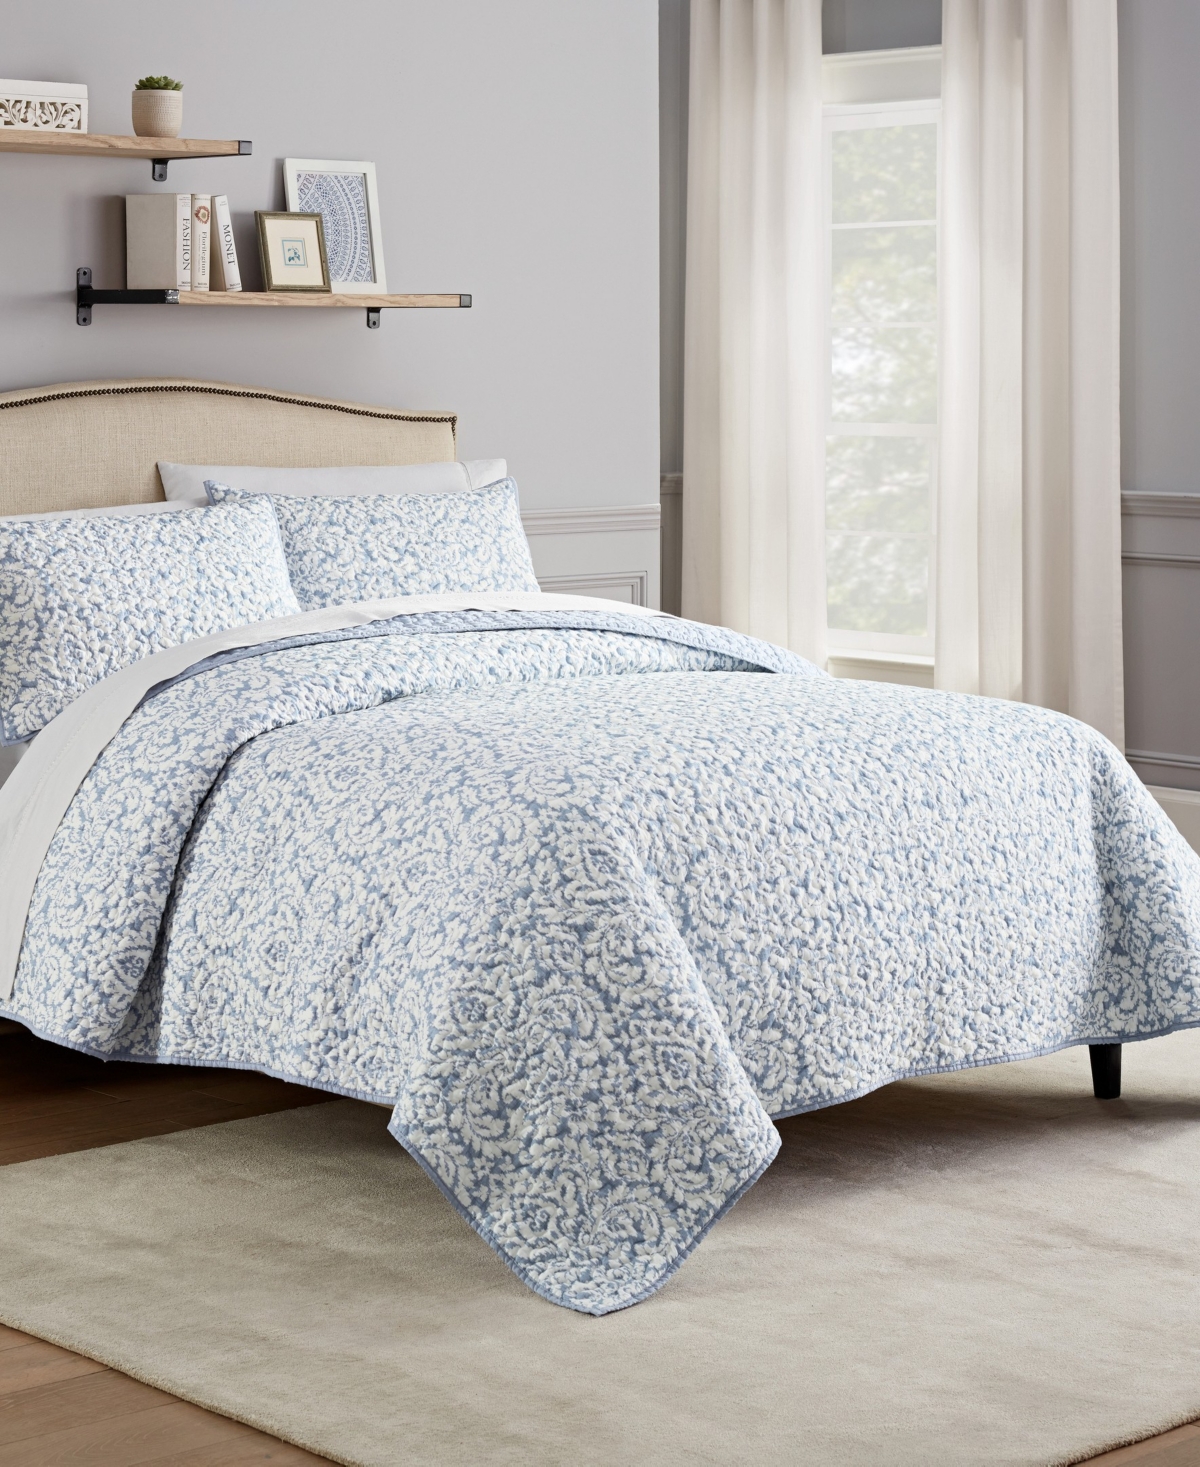 Waverly 3 Piece Traditions Dashing Damask Quilt Set, King In Porcelain